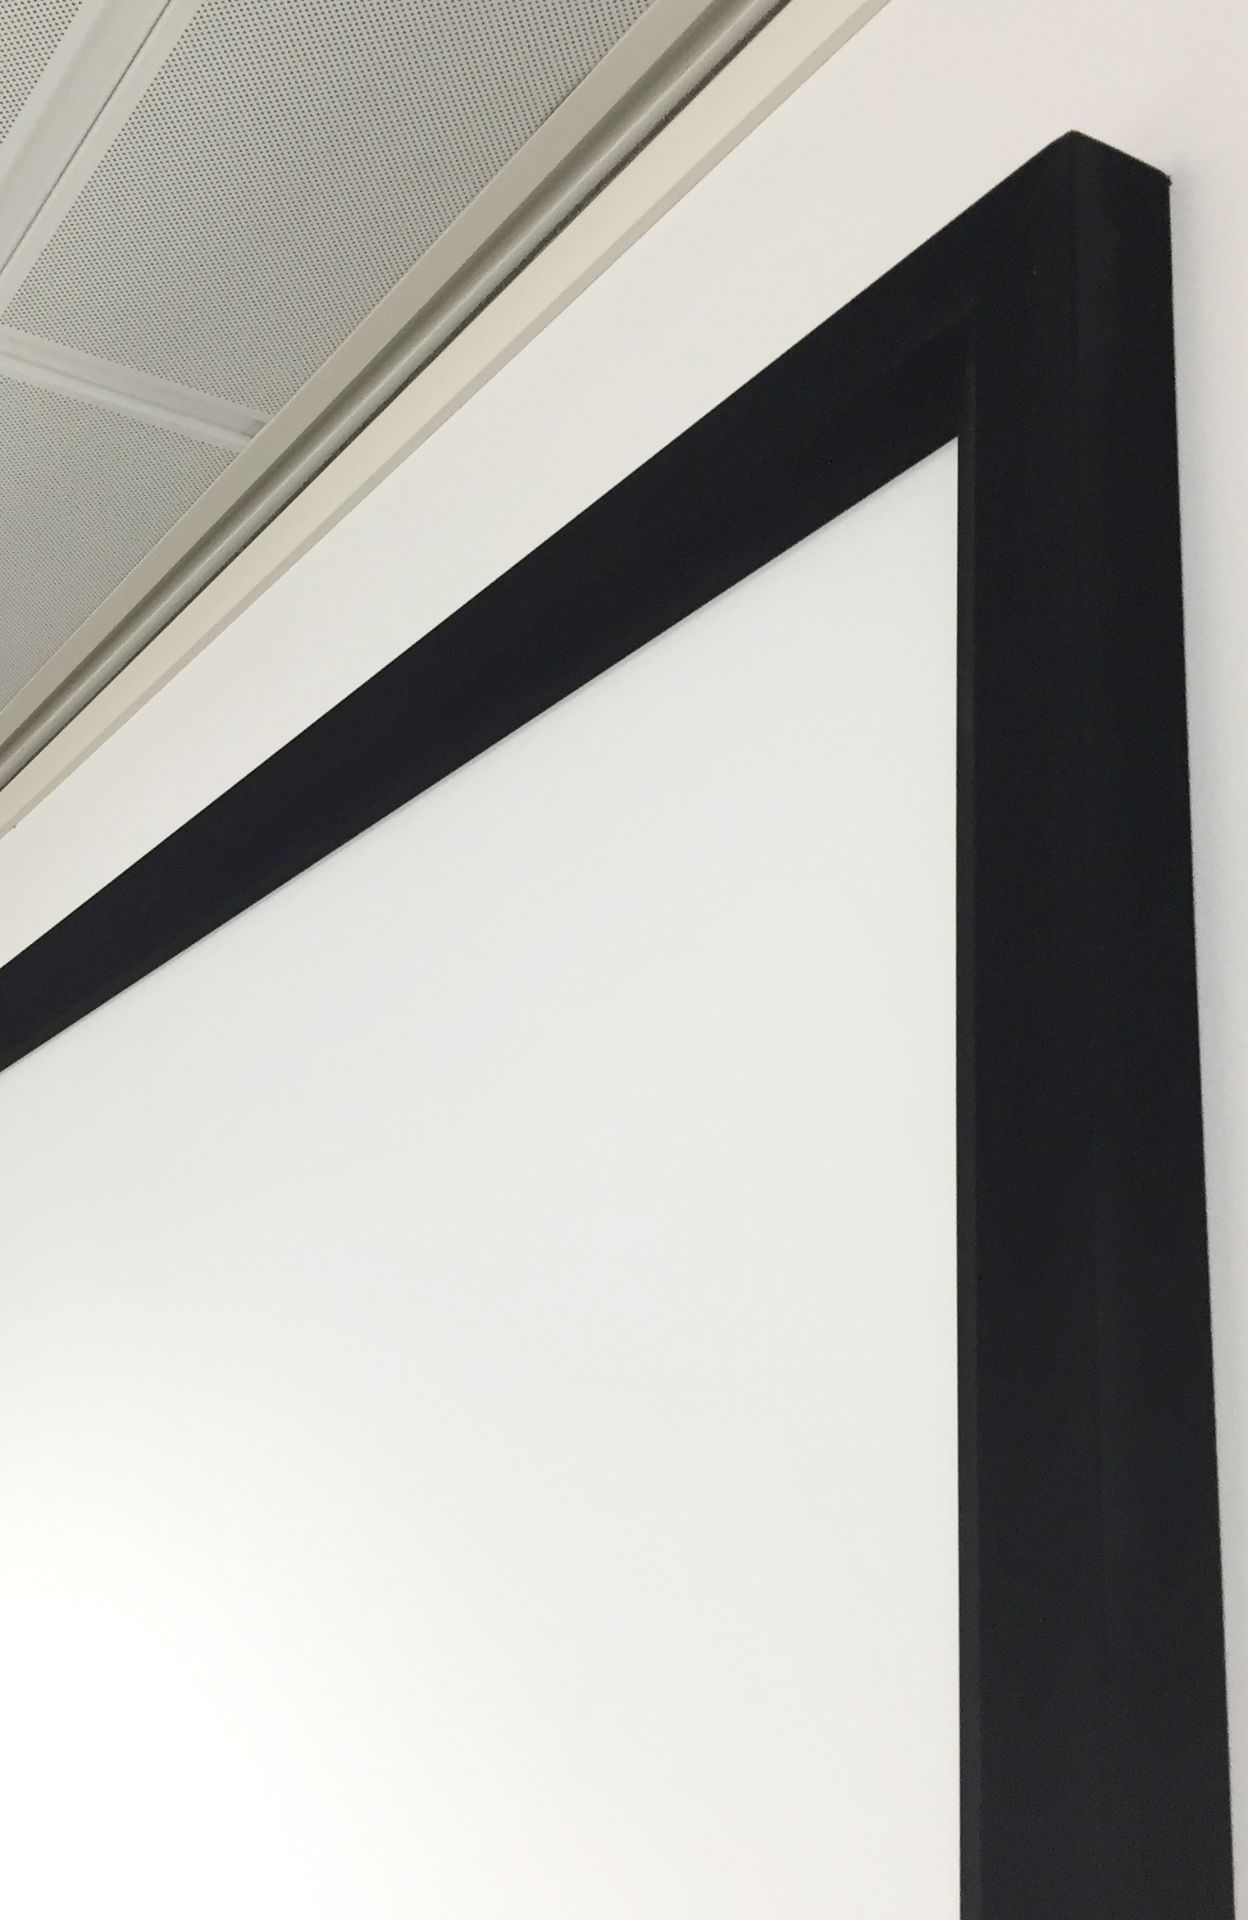 1 x Fixed Frame CINEMATIC Projection Screen - Large Size With Deep Black Velvet Surround - Size - Image 3 of 4